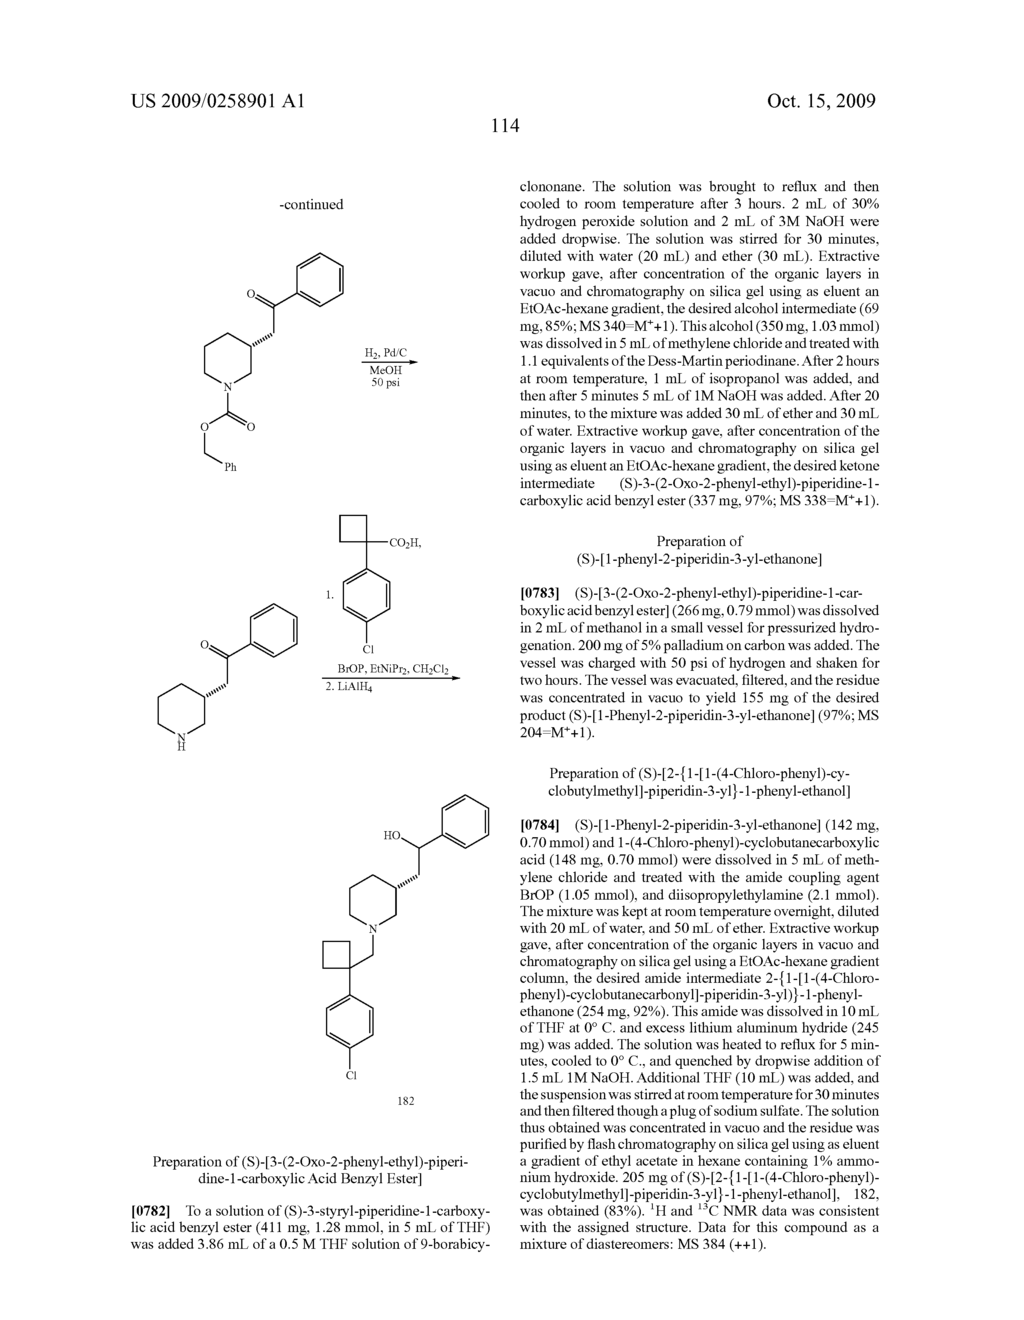 LIGANDS FOR MONOAMINE RECEPTORS AND TRANSPORTERS, AND METHODS OF USE THEREOF - diagram, schematic, and image 116